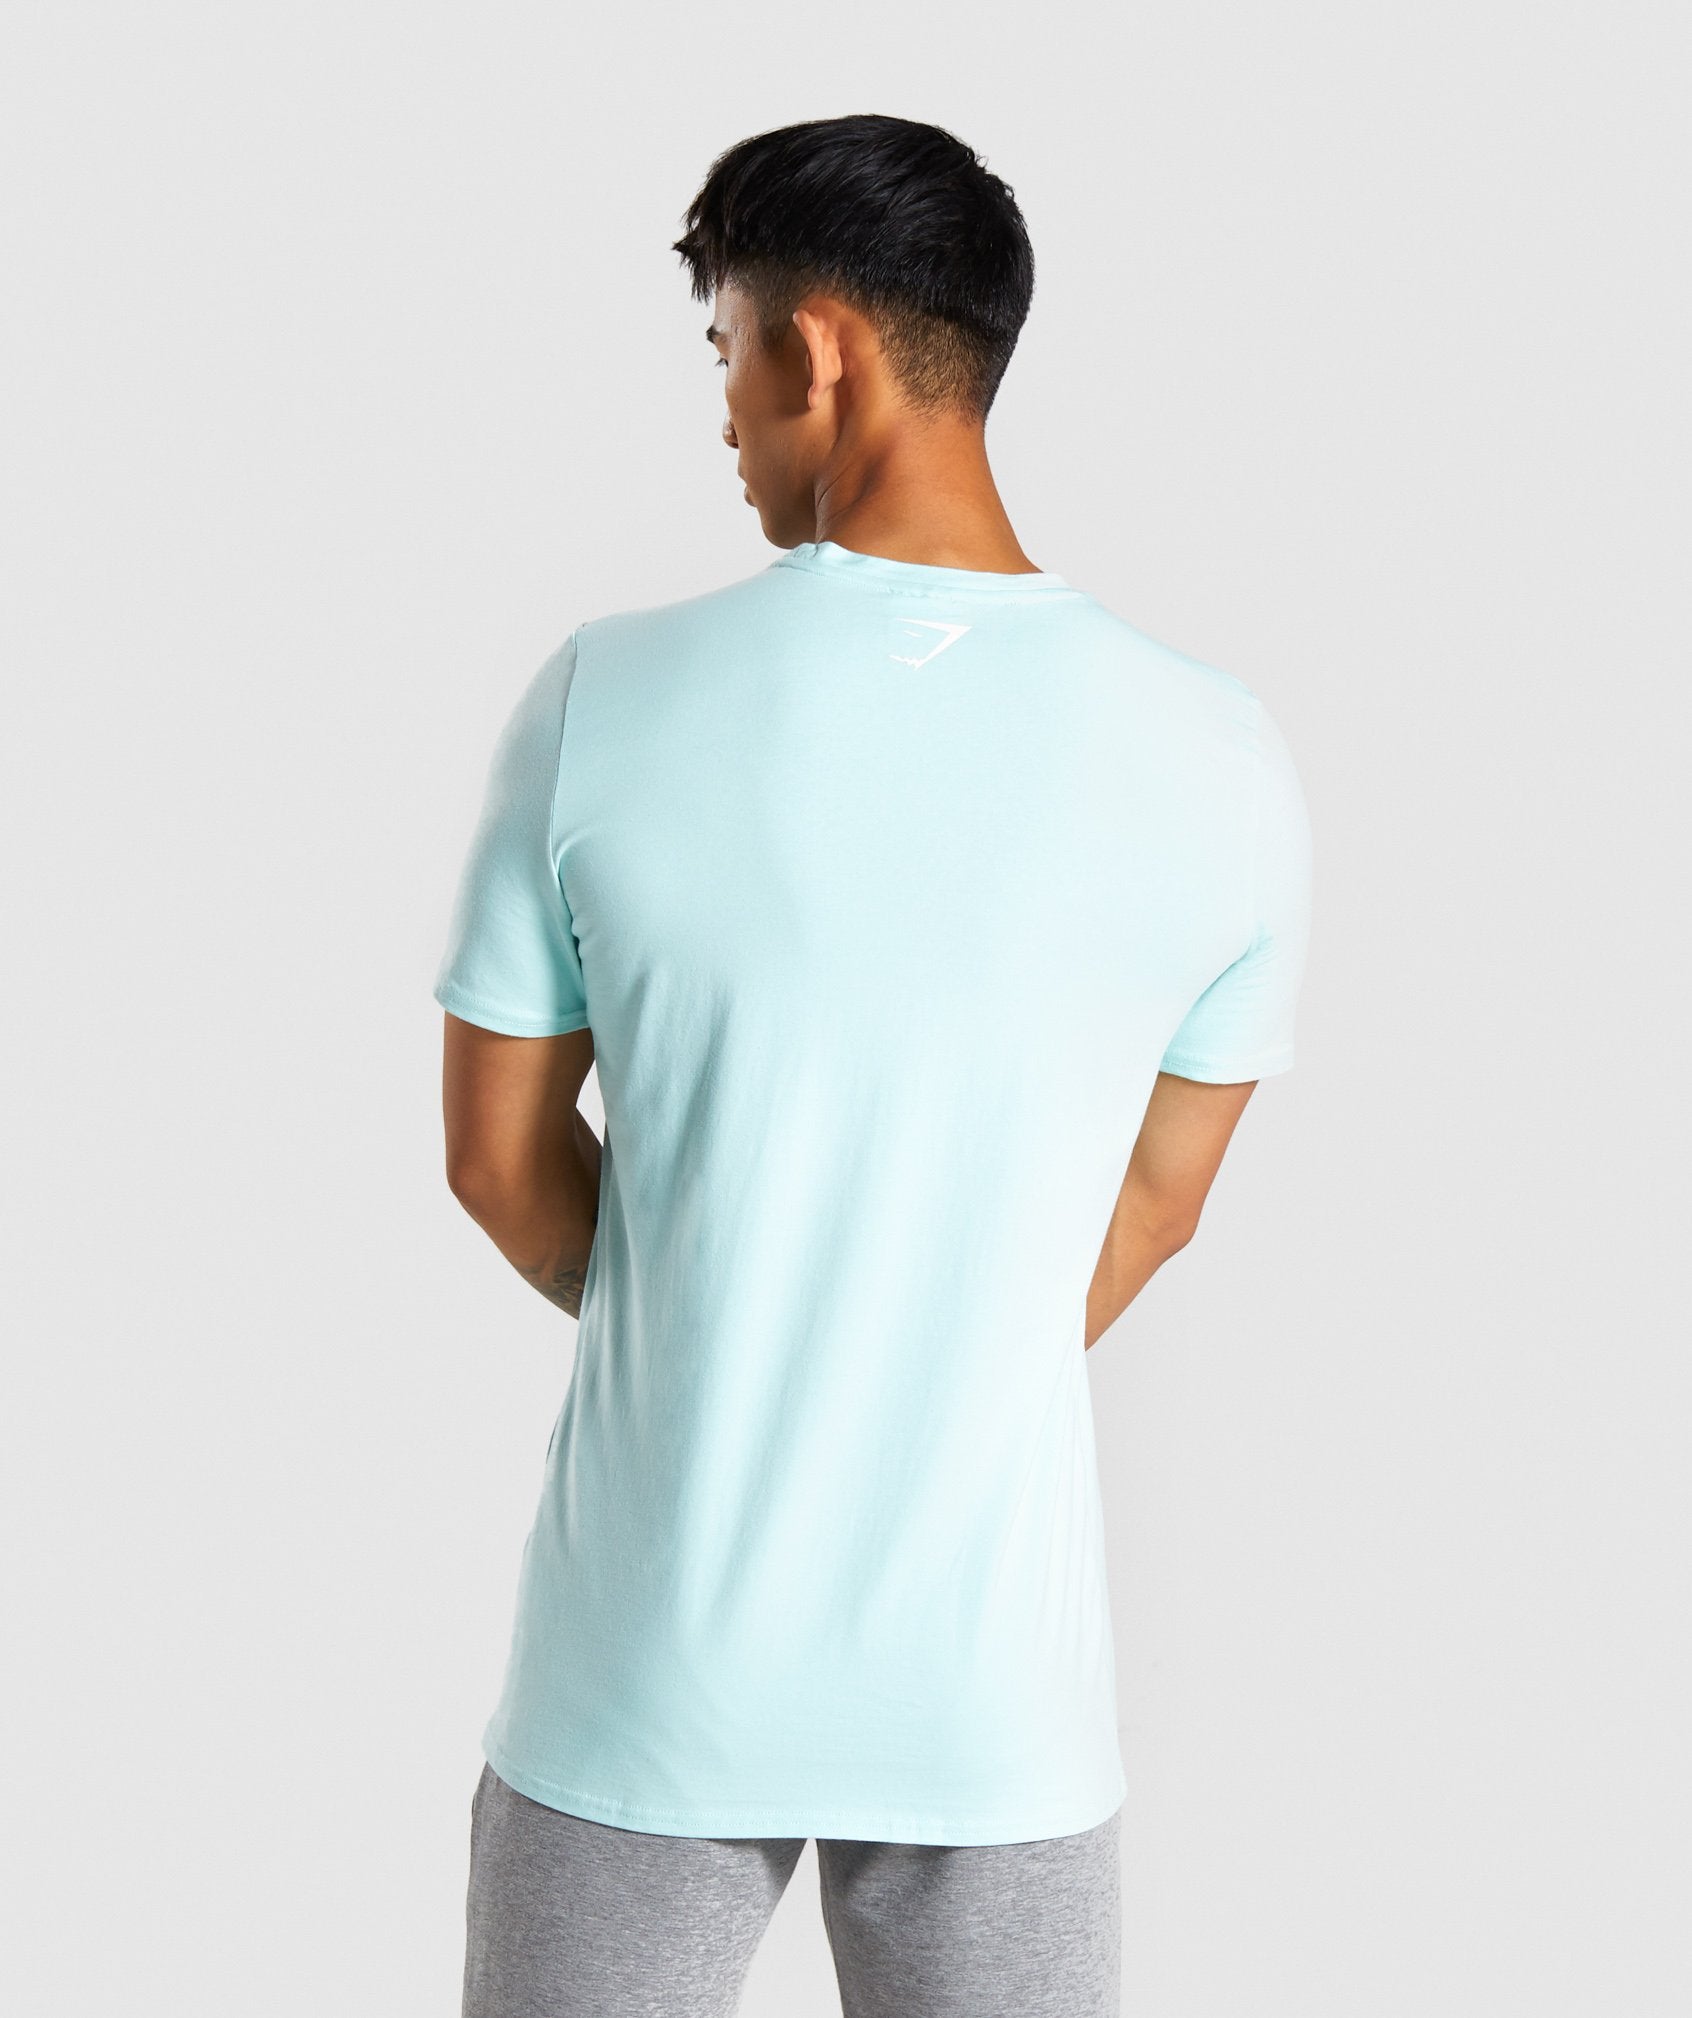 Glitch T-Shirt in Turquoise - view 2